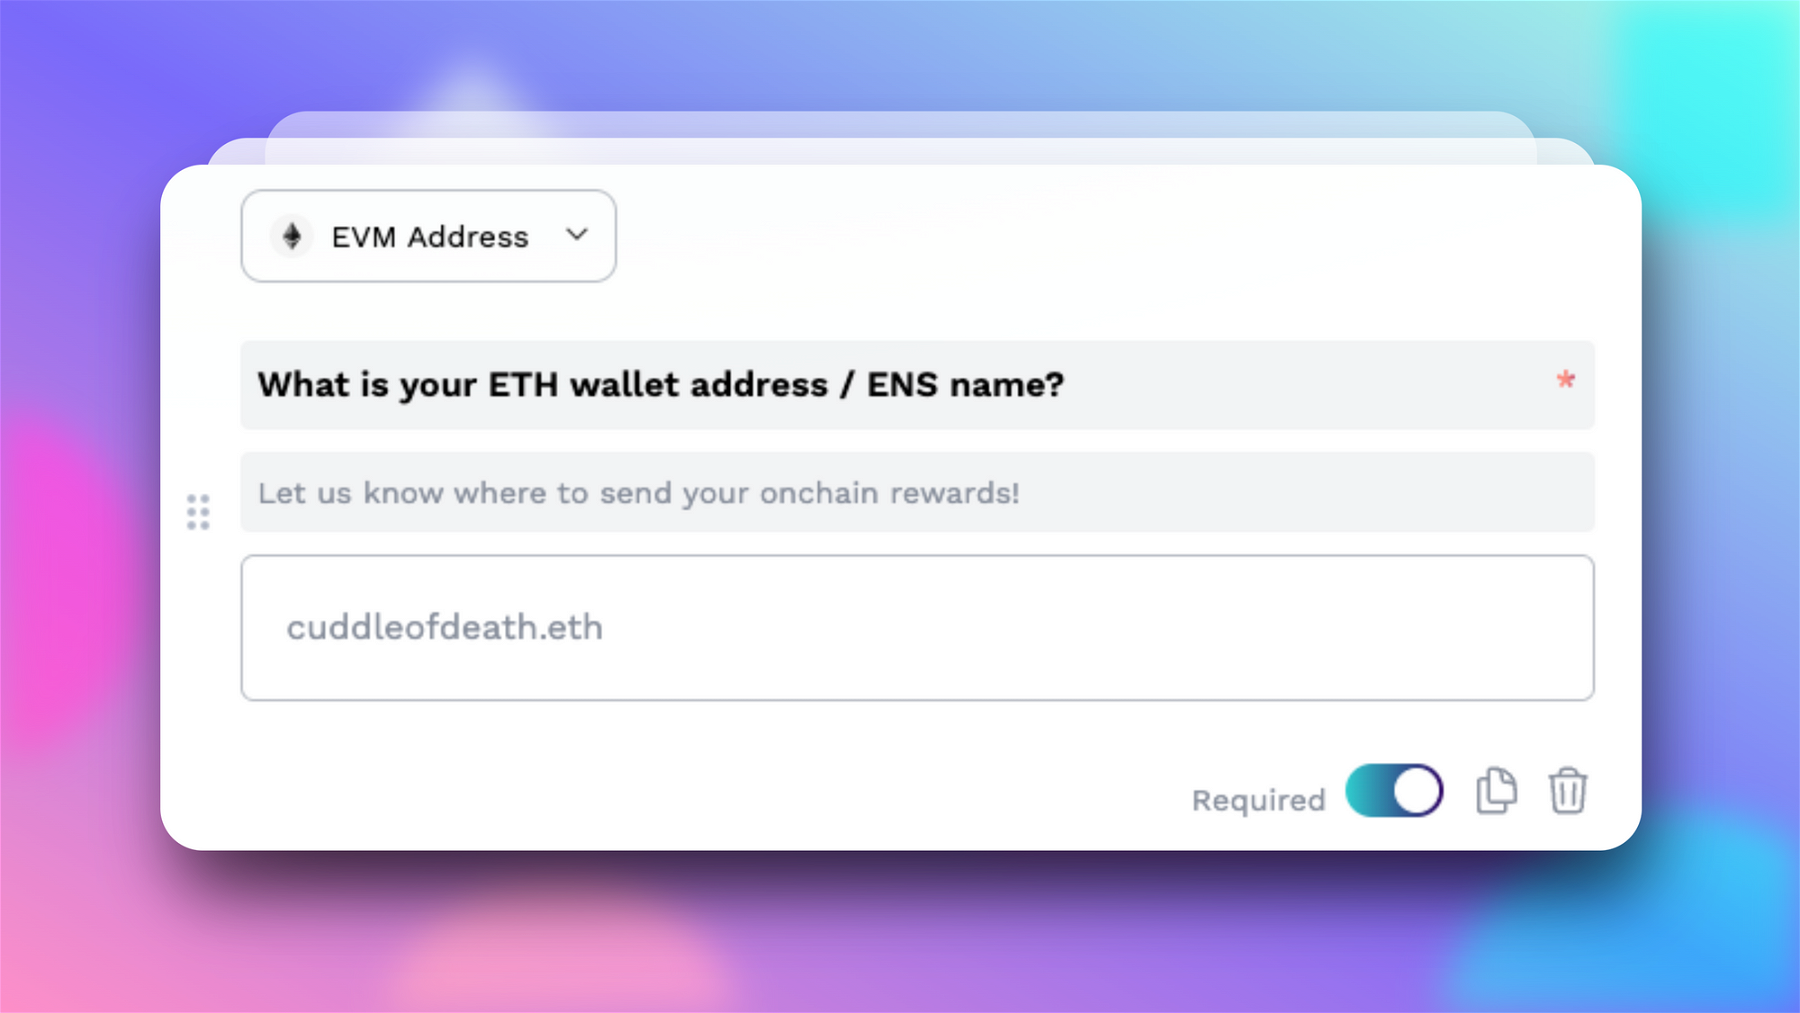 Example of an EVM Address question: “What is your ETH wallet address / ENS name?”